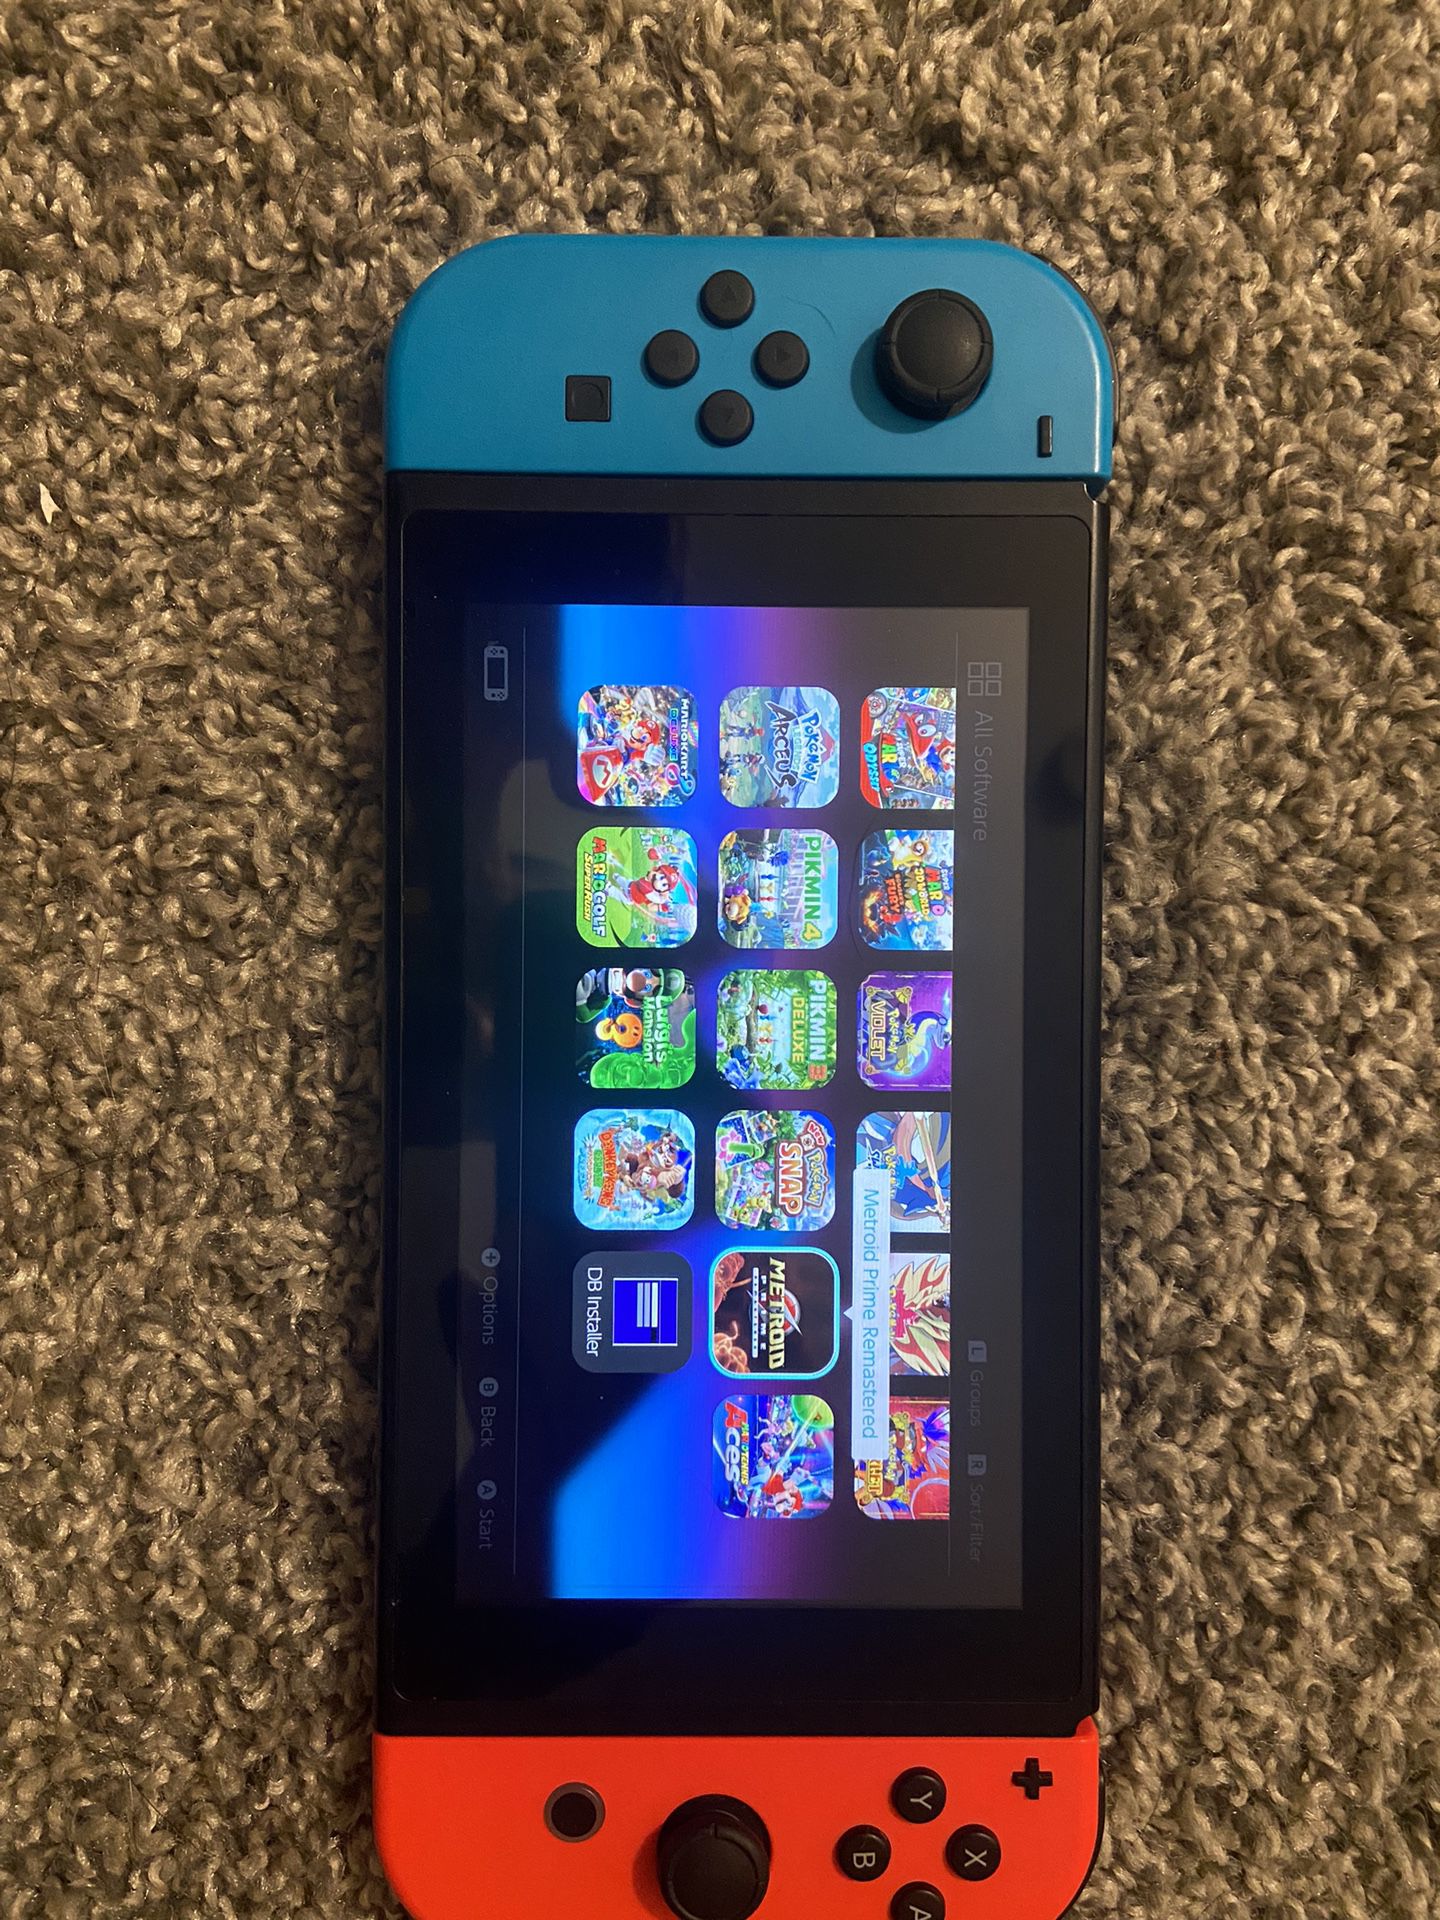 Nintendeal on X: The Mig Switch Nintendo Switch flash cart does not  require a modded console. A modded console is required to backup your own  games. Ships early next year. I deleted